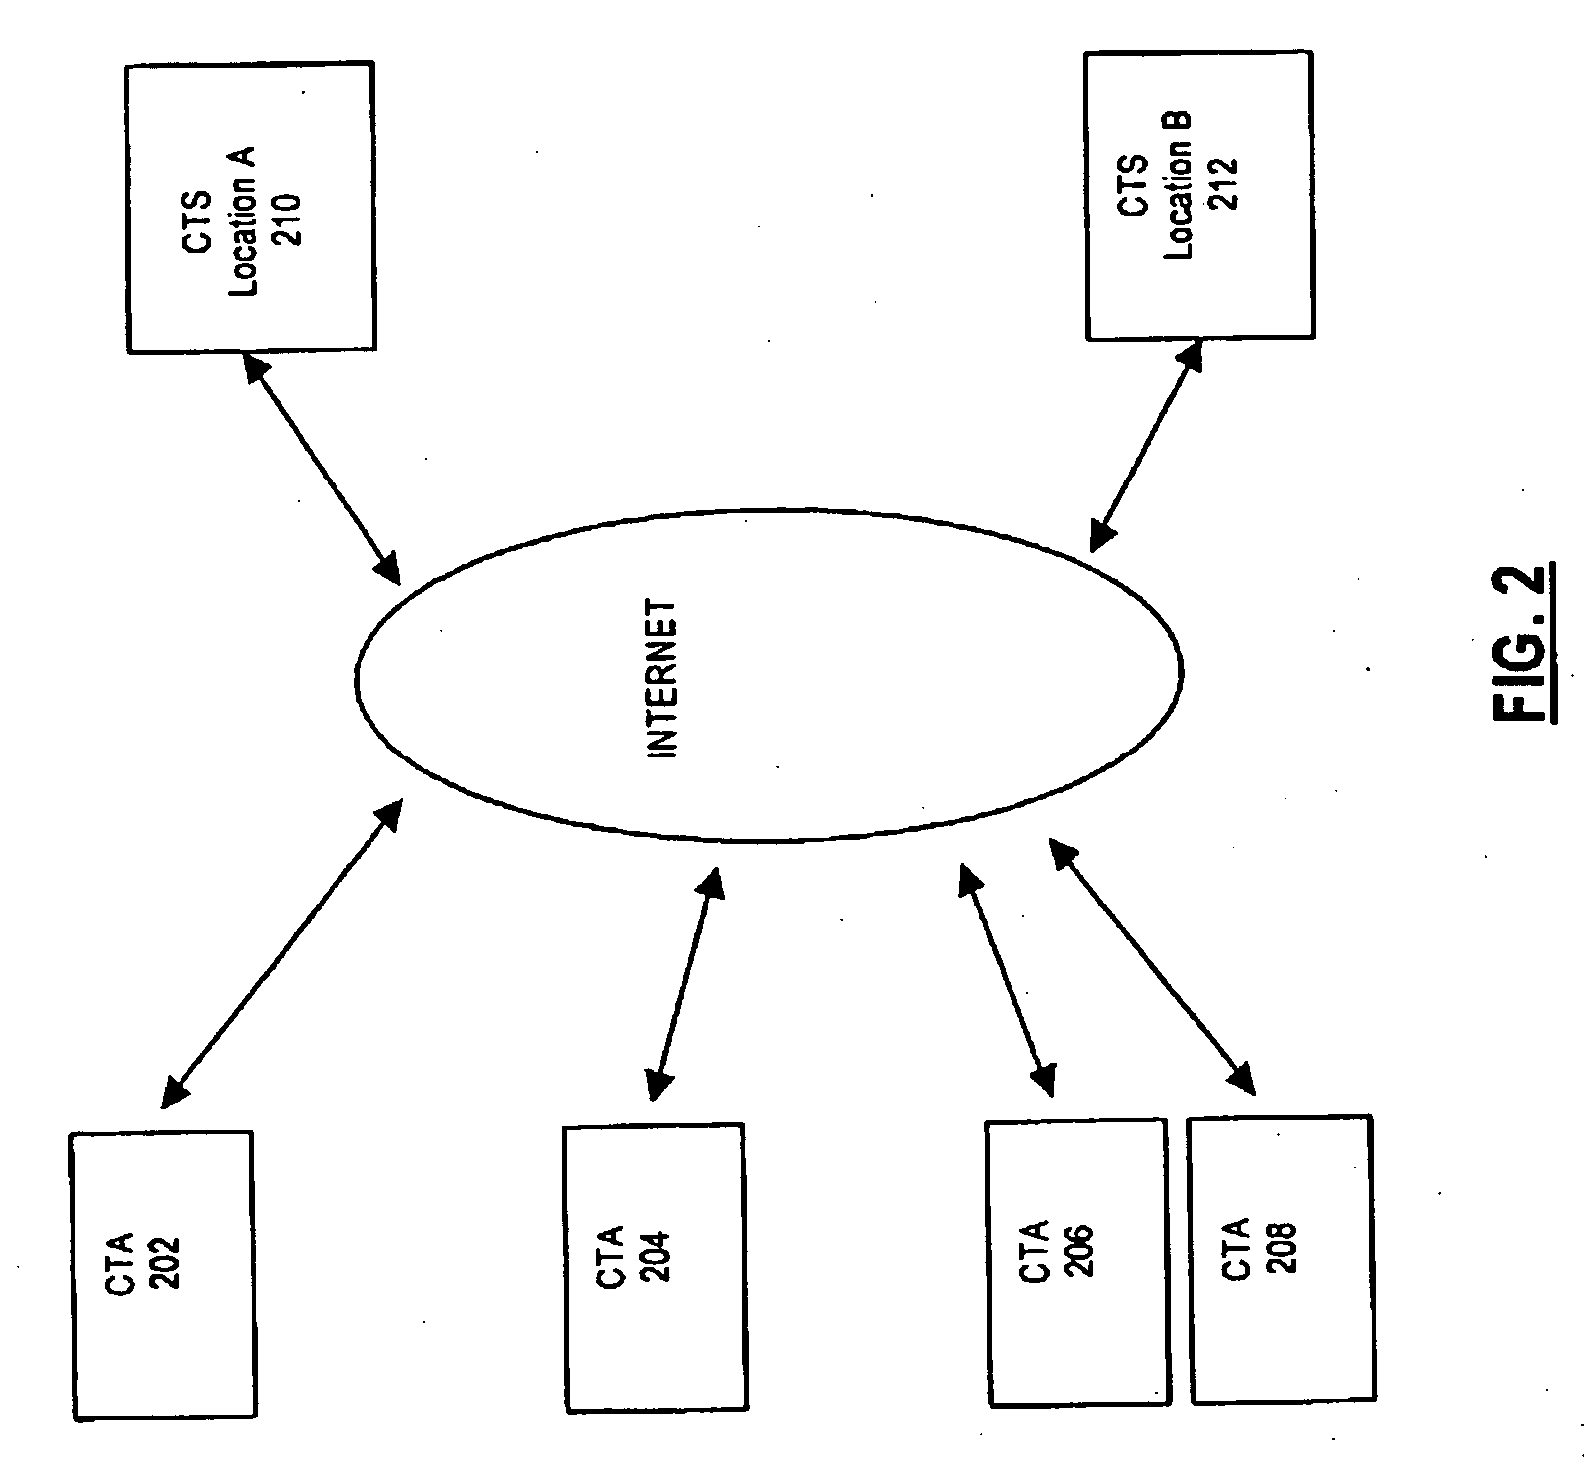 Method and system for relocating and using enterprise management tools in a service provider model